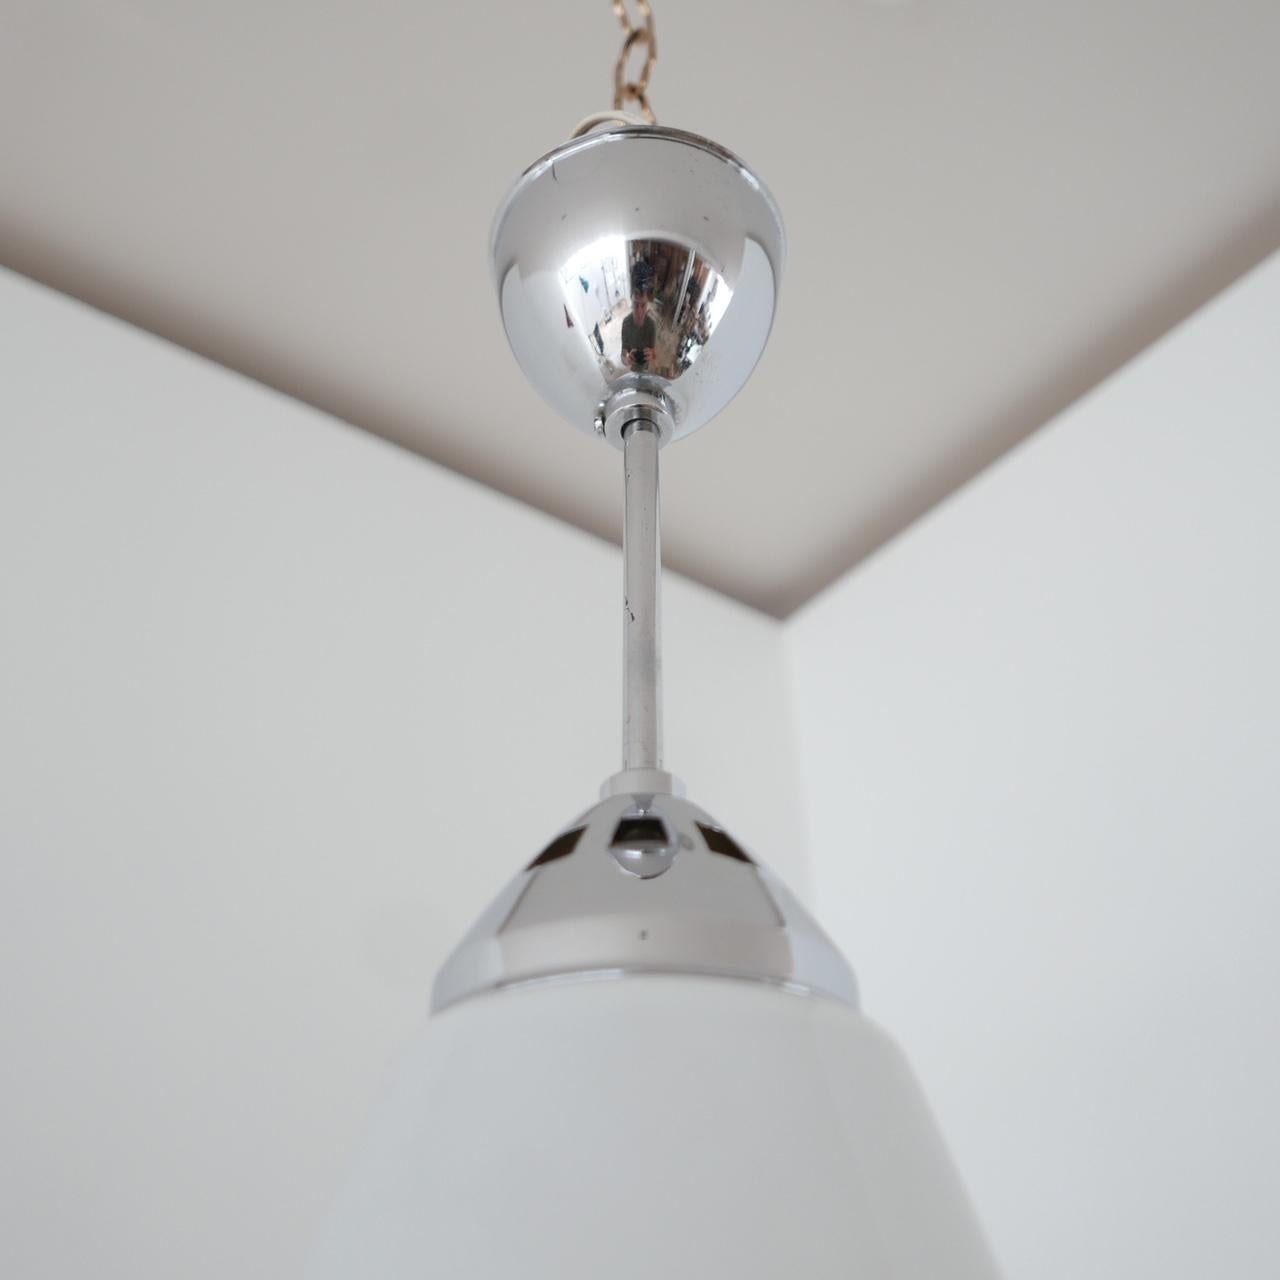 A scarce pendant light by Zeiss Ikon.

Mirrored glass removable shade sits over an opaline pendant.

Labelled Zeiss Ikon.

Re-wired and PAT tested.

Dimensions: 38 diameter x 50 height in cm.

Delivery: POA.

 